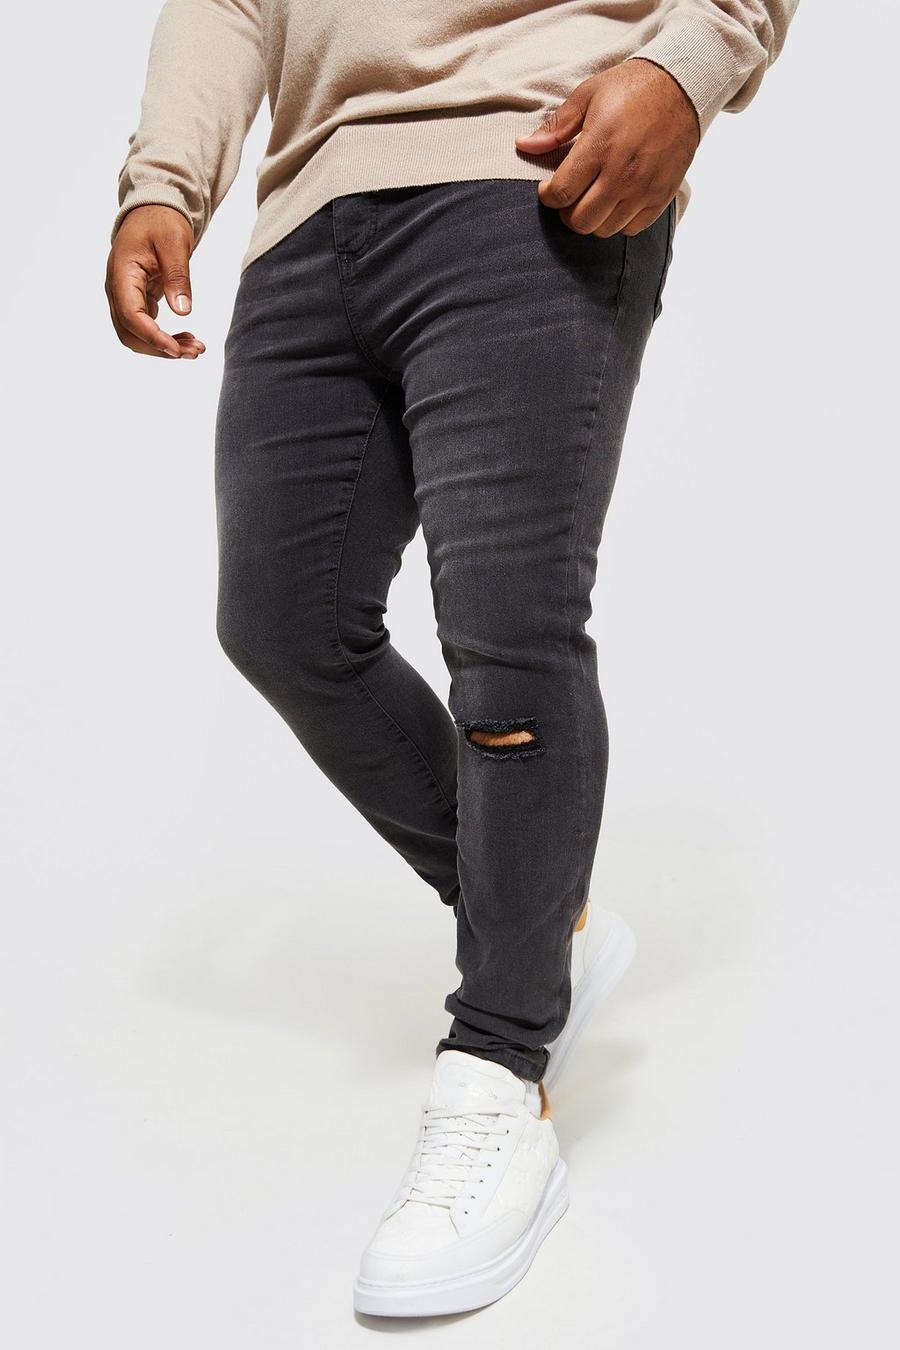 Charcoal gris Plus Size Busted Knee Super Skinny Jean